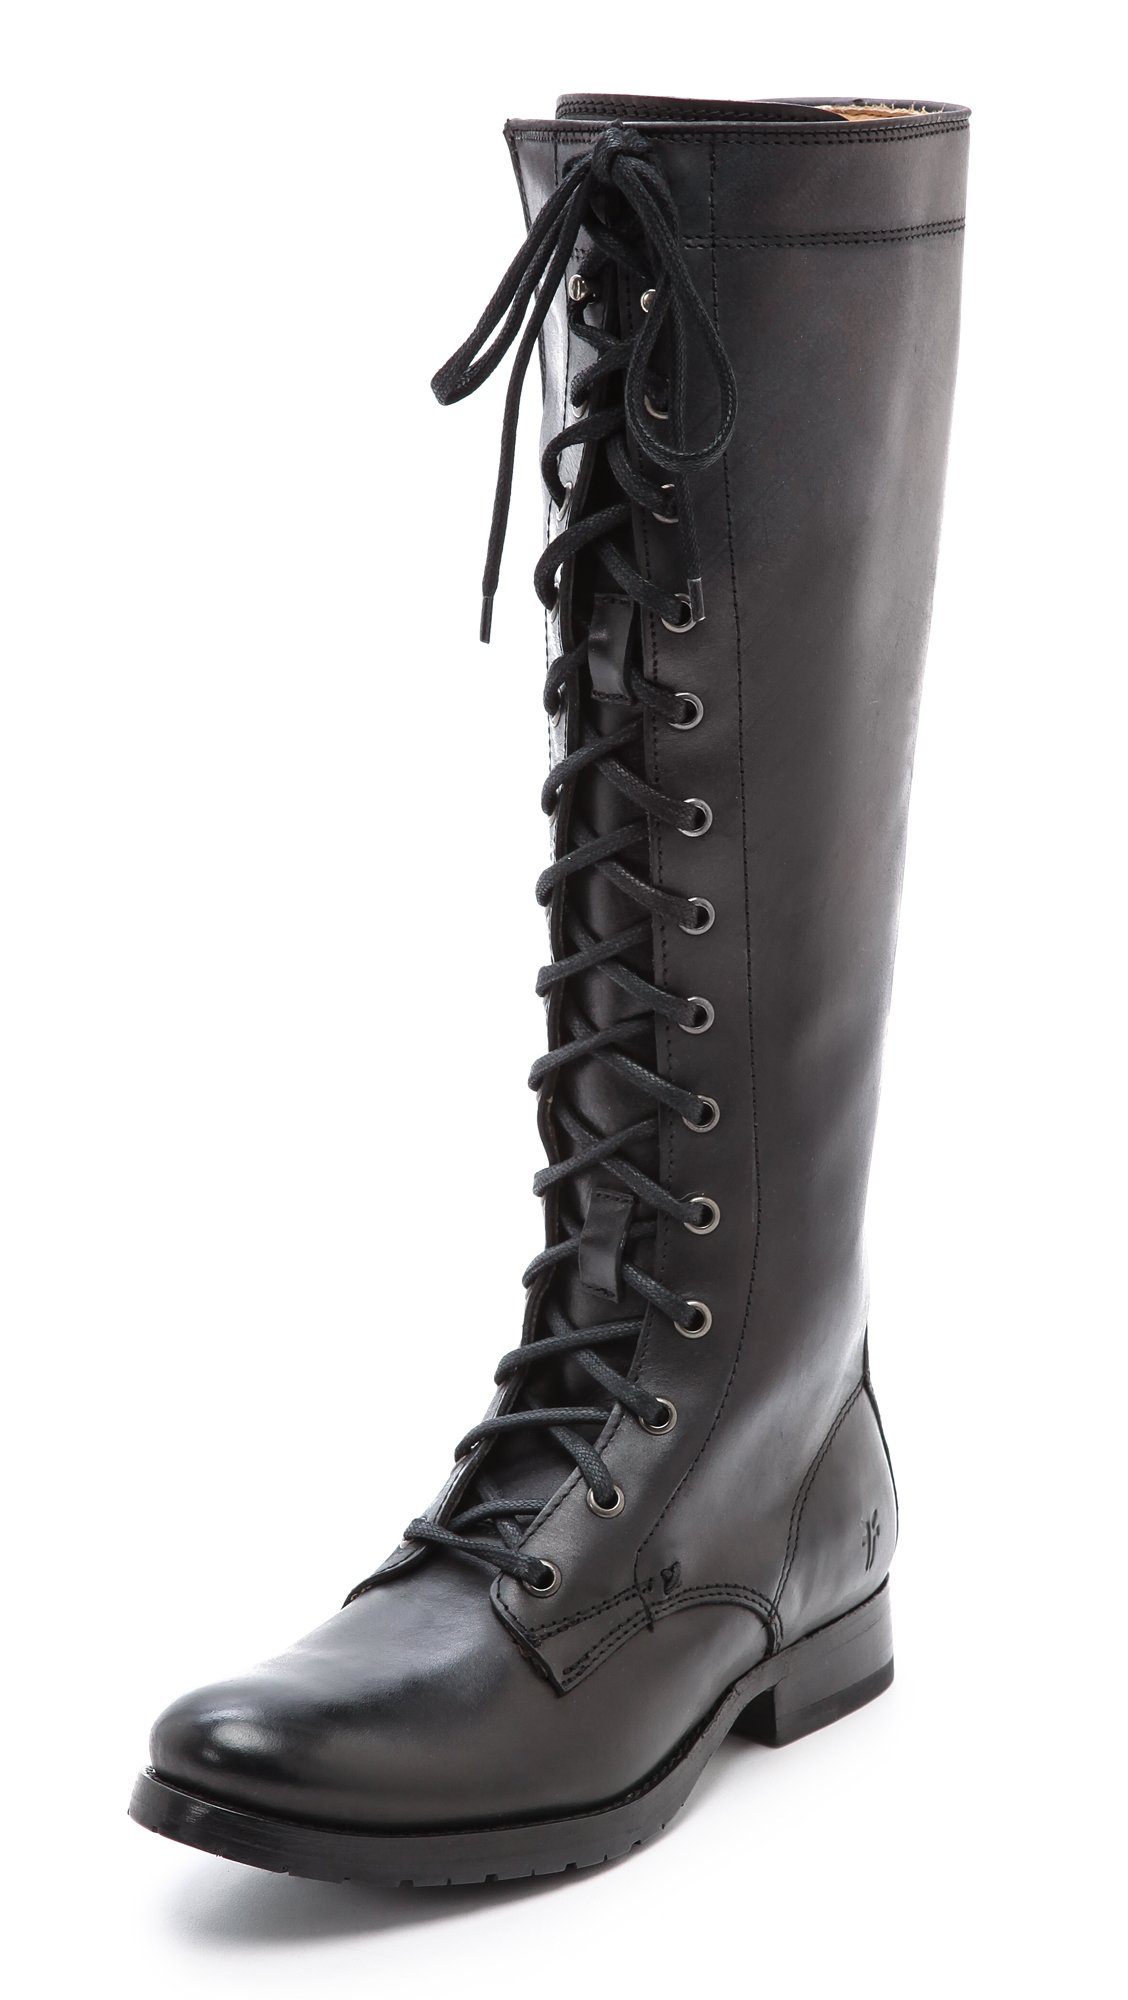 Frye Melissa Tall Lace Up Boots - Black in Black | Lyst